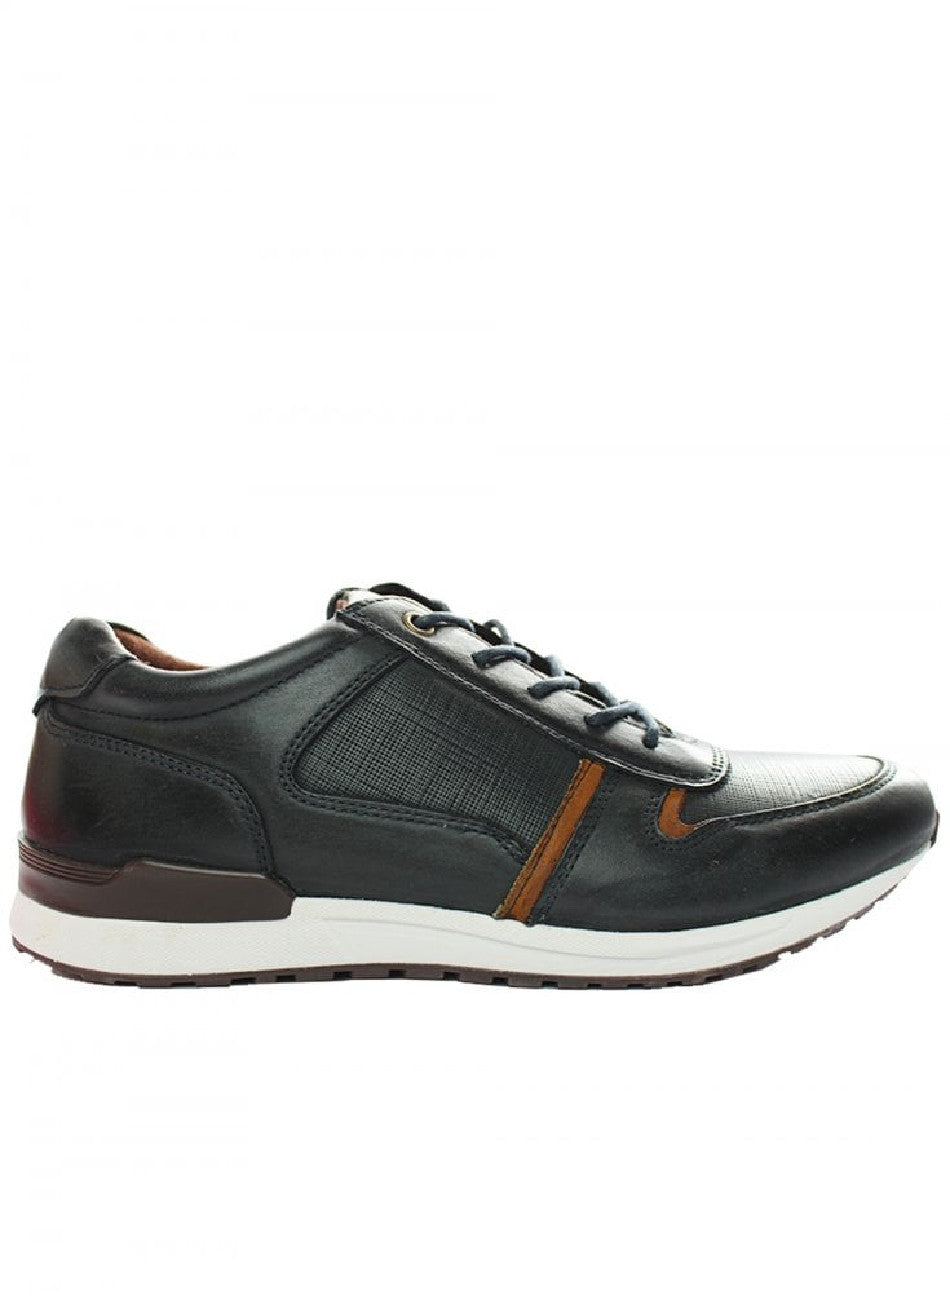 Tiago Leather Trainers - Navy